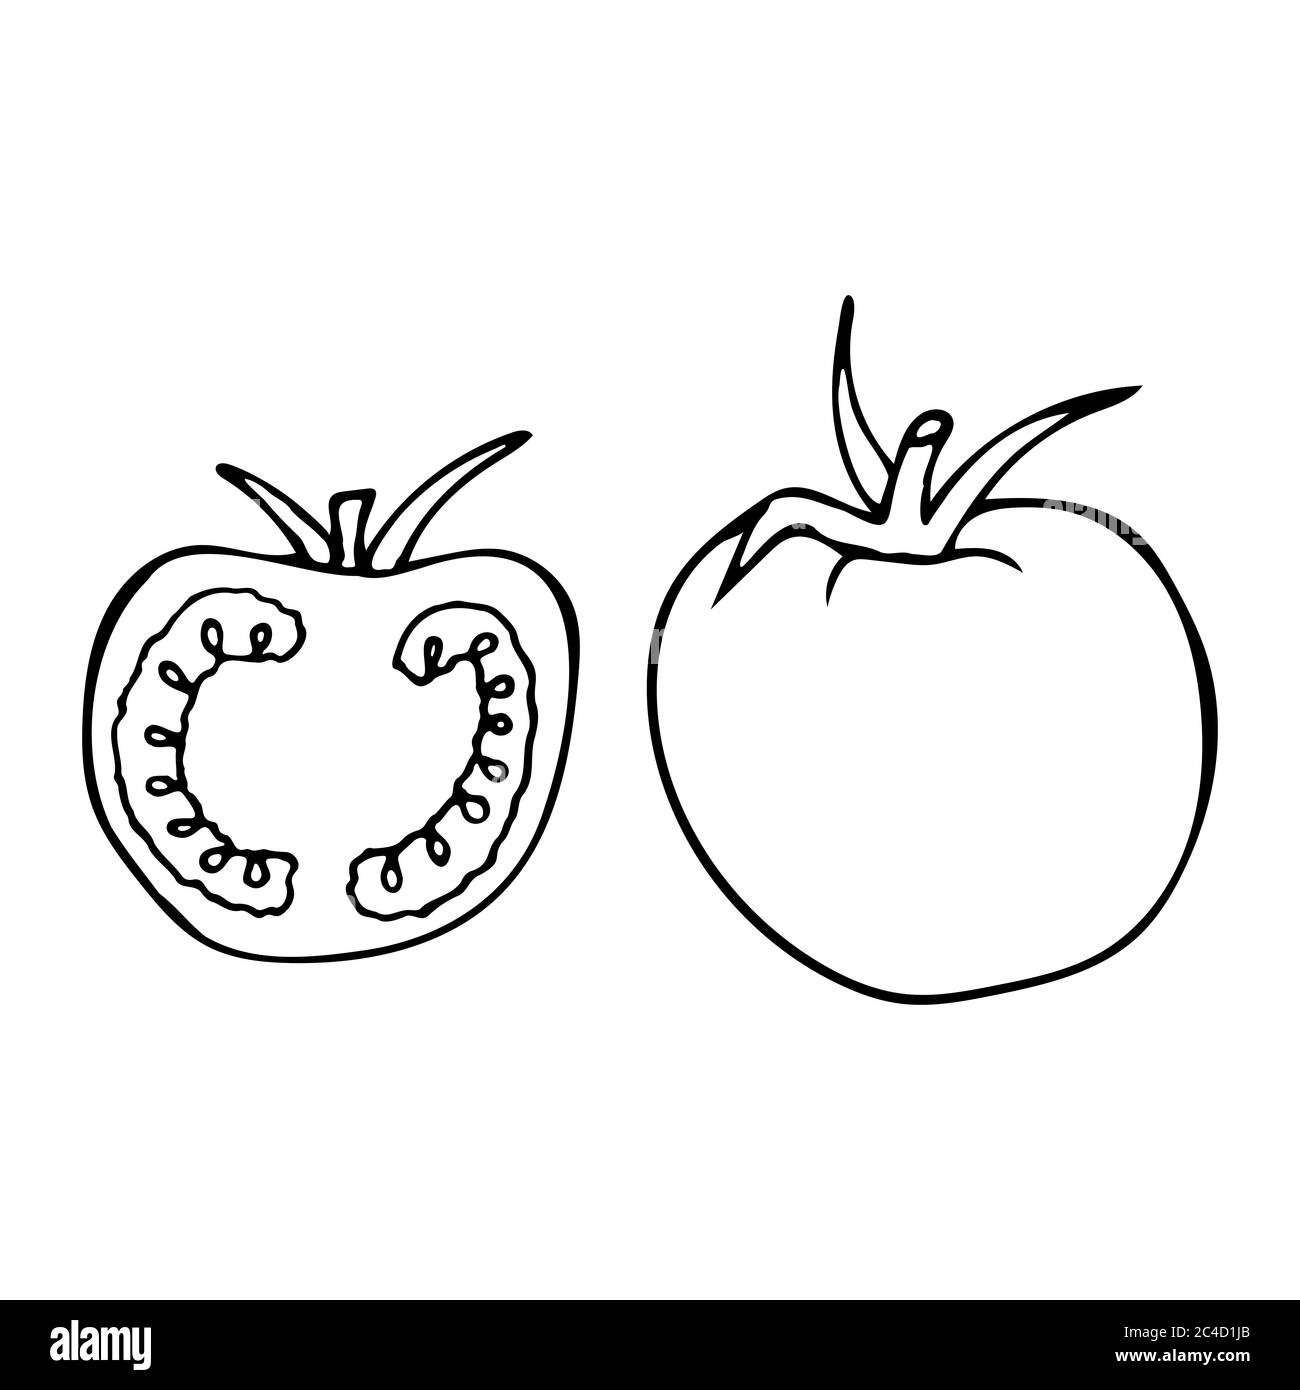 Tomato with stem and leaf. Hand drawn outline doodle icon. Transparent isolated on white background. Vector illustration for greeting cards, posters Stock Vector